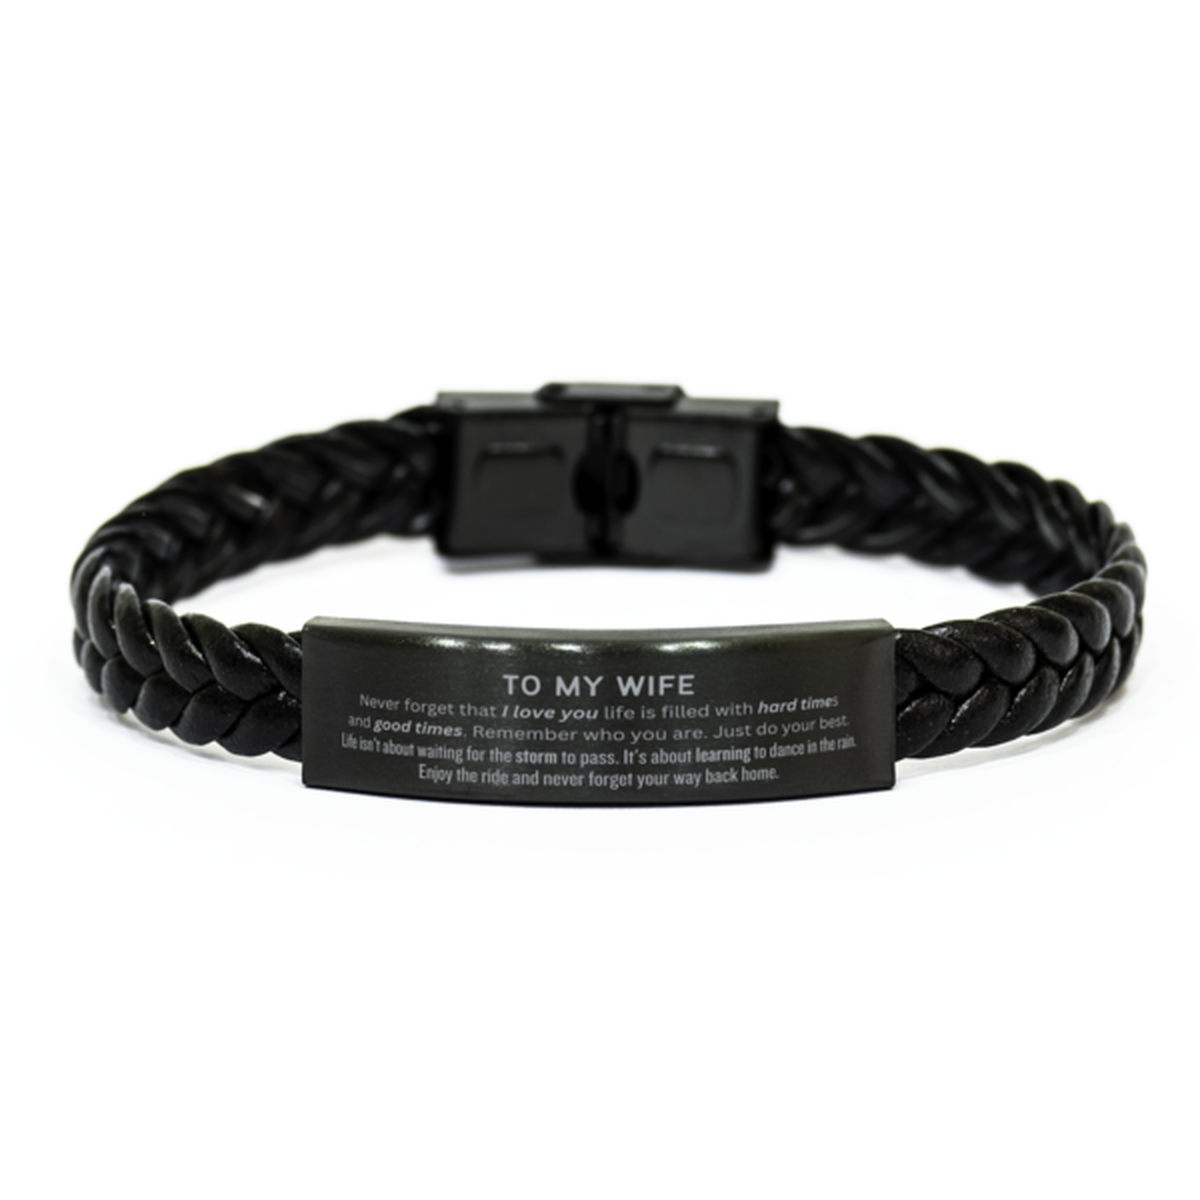 Christmas Wife Braided Leather Bracelet Gifts, To My Wife Birthday Thank You Gifts For Wife, Graduation Unique Gifts For Wife To My Wife Never forget that I love you life is filled with hard times and good times. Remember who you are. Just do your best